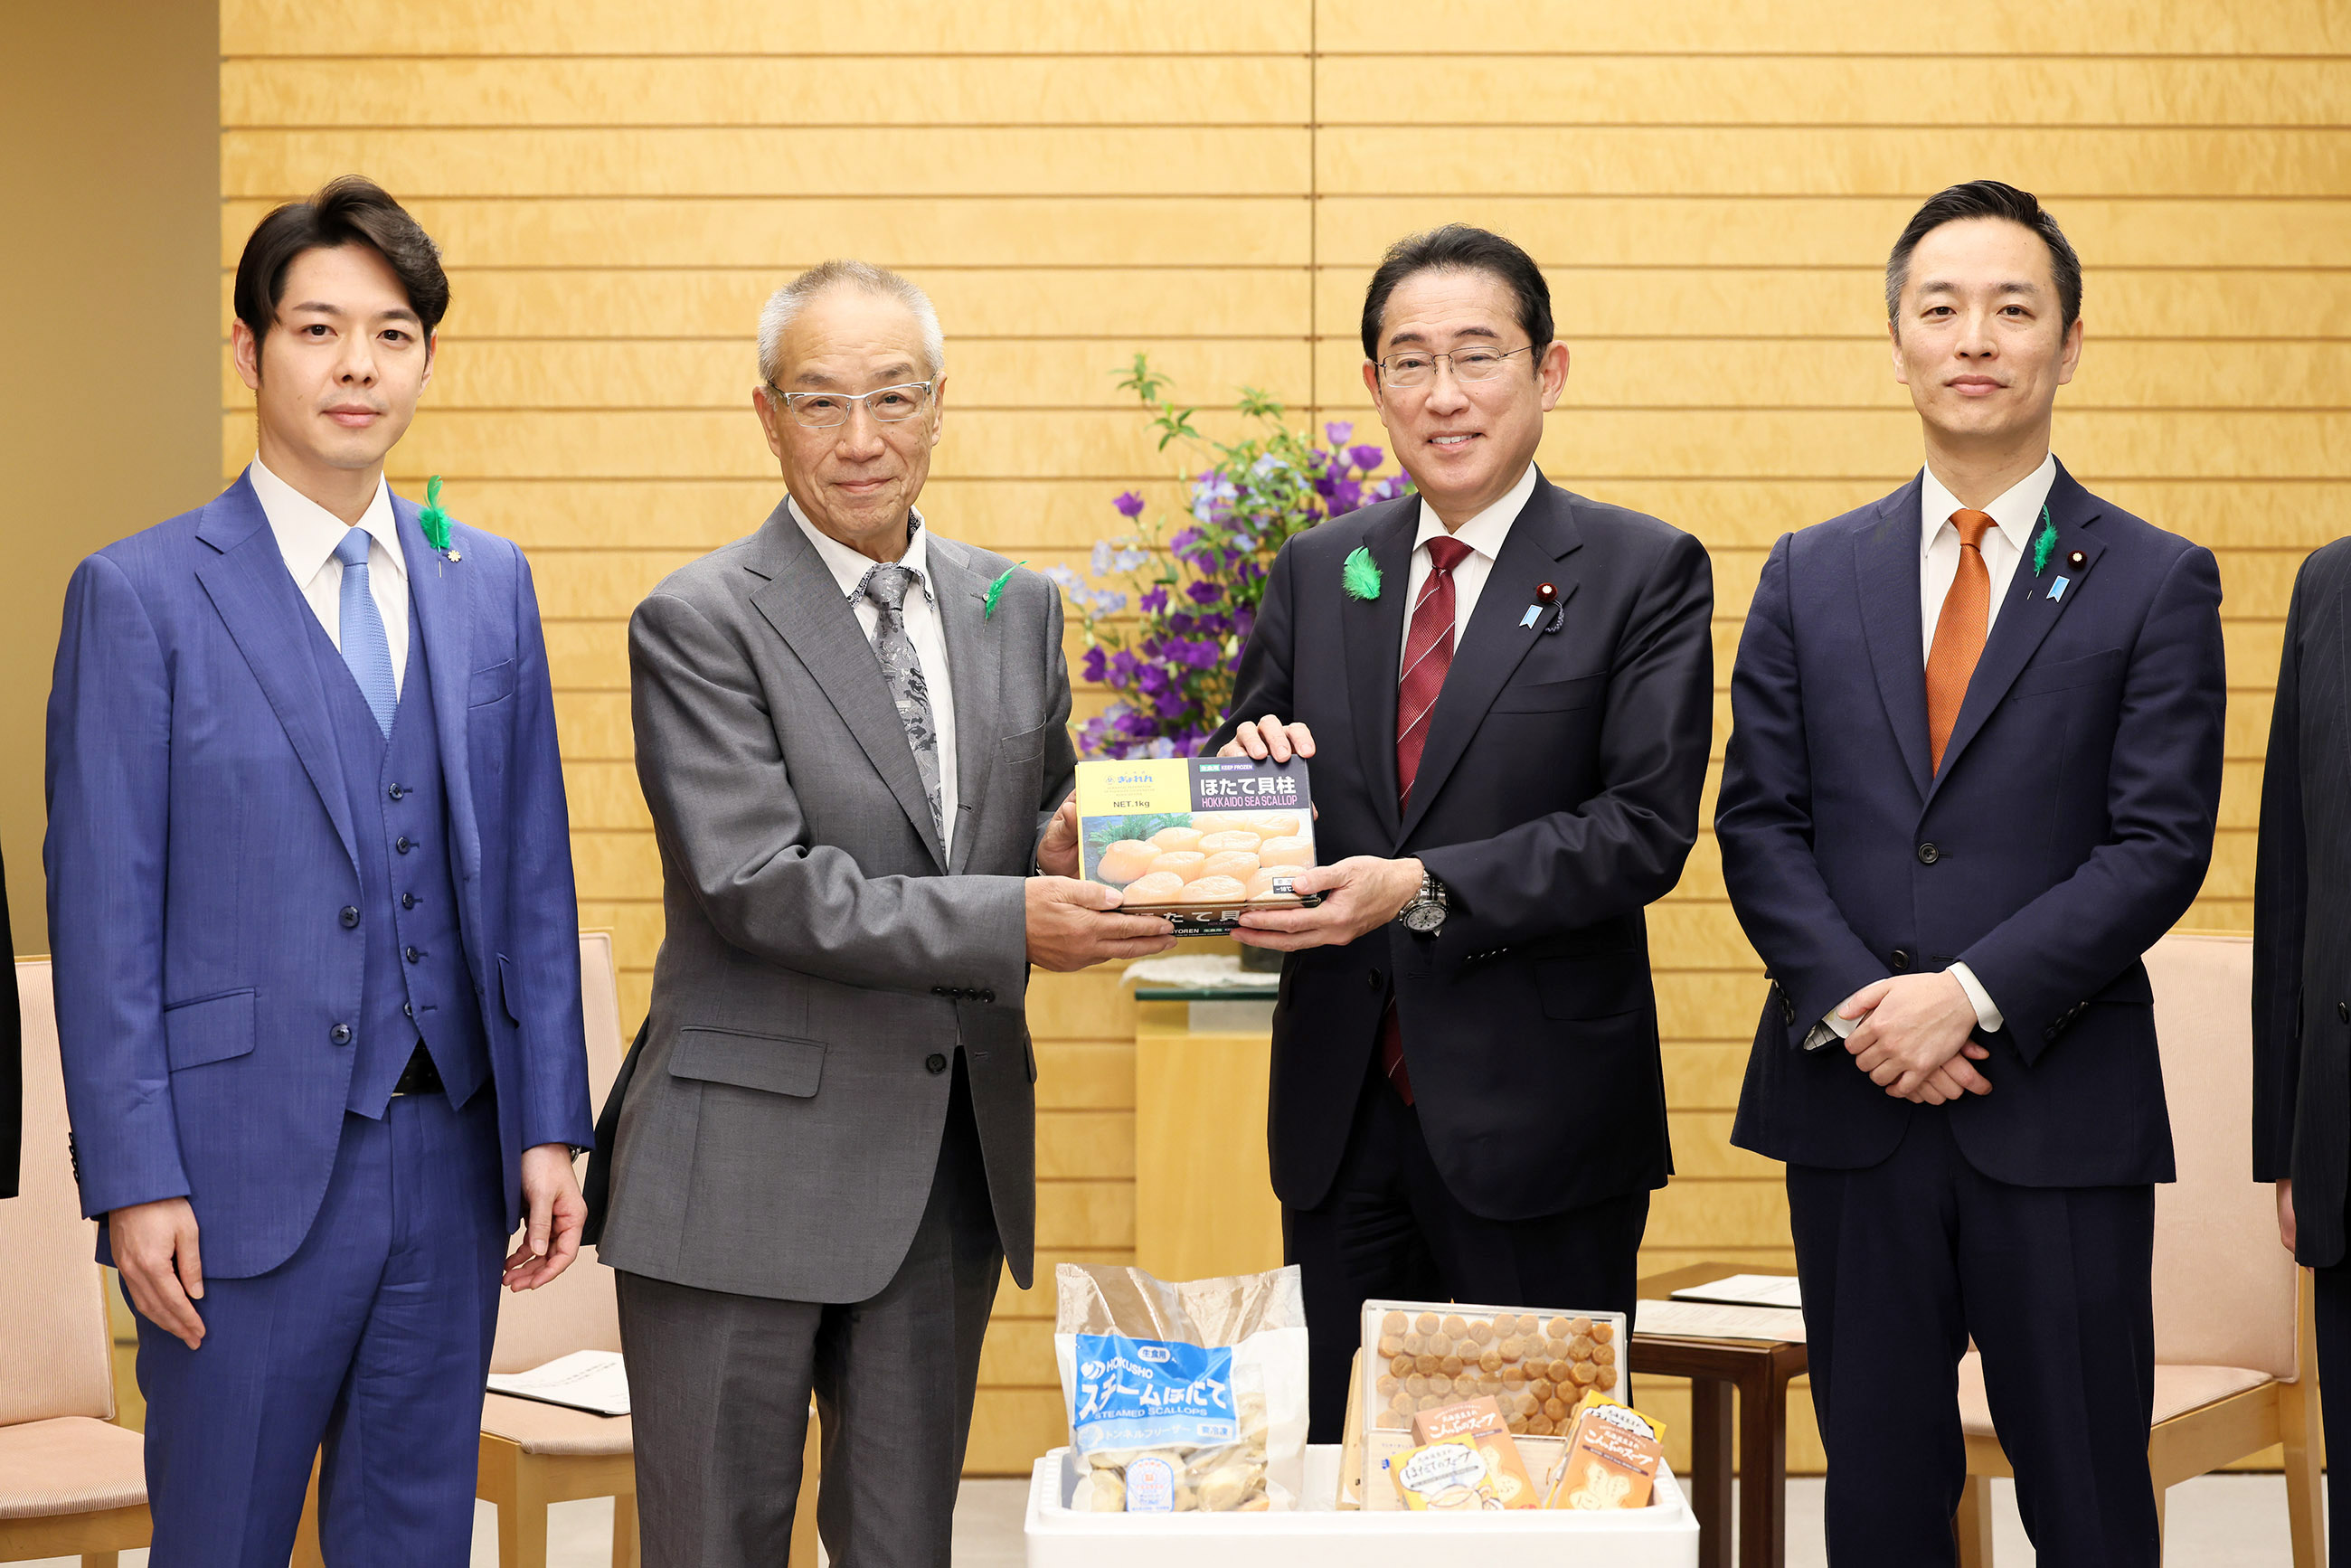 Presentation of Requests by the Hokkaido Government, the Hokkaido Legislative Assembly and the Hokkaido Federation of Fisheries Cooperative Associations